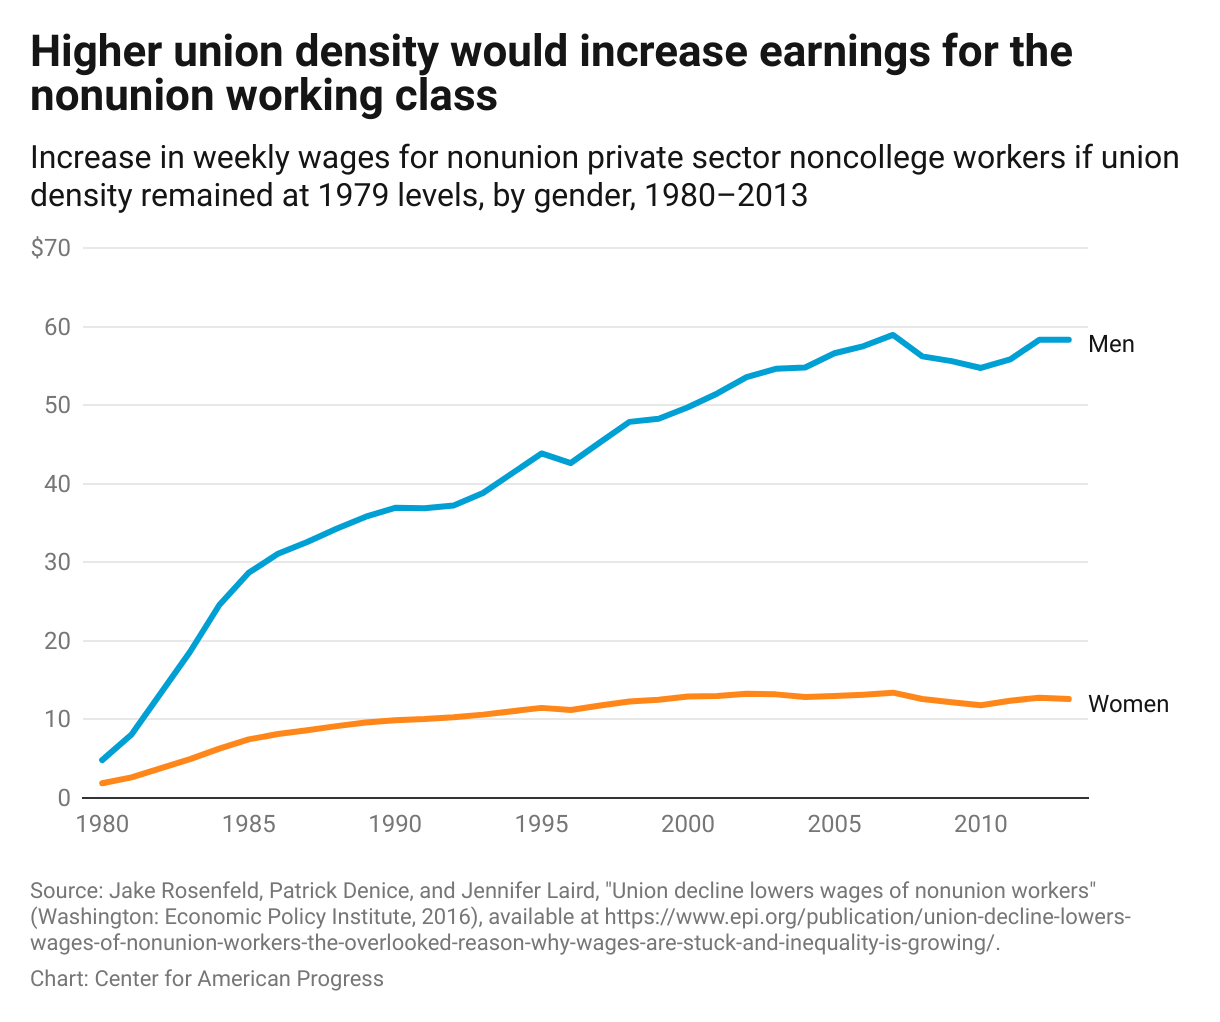 Line chart showing that wages would have increased for the working class by $58.31 for men and $12.59 for women every week if union density remained at 1979 levels.